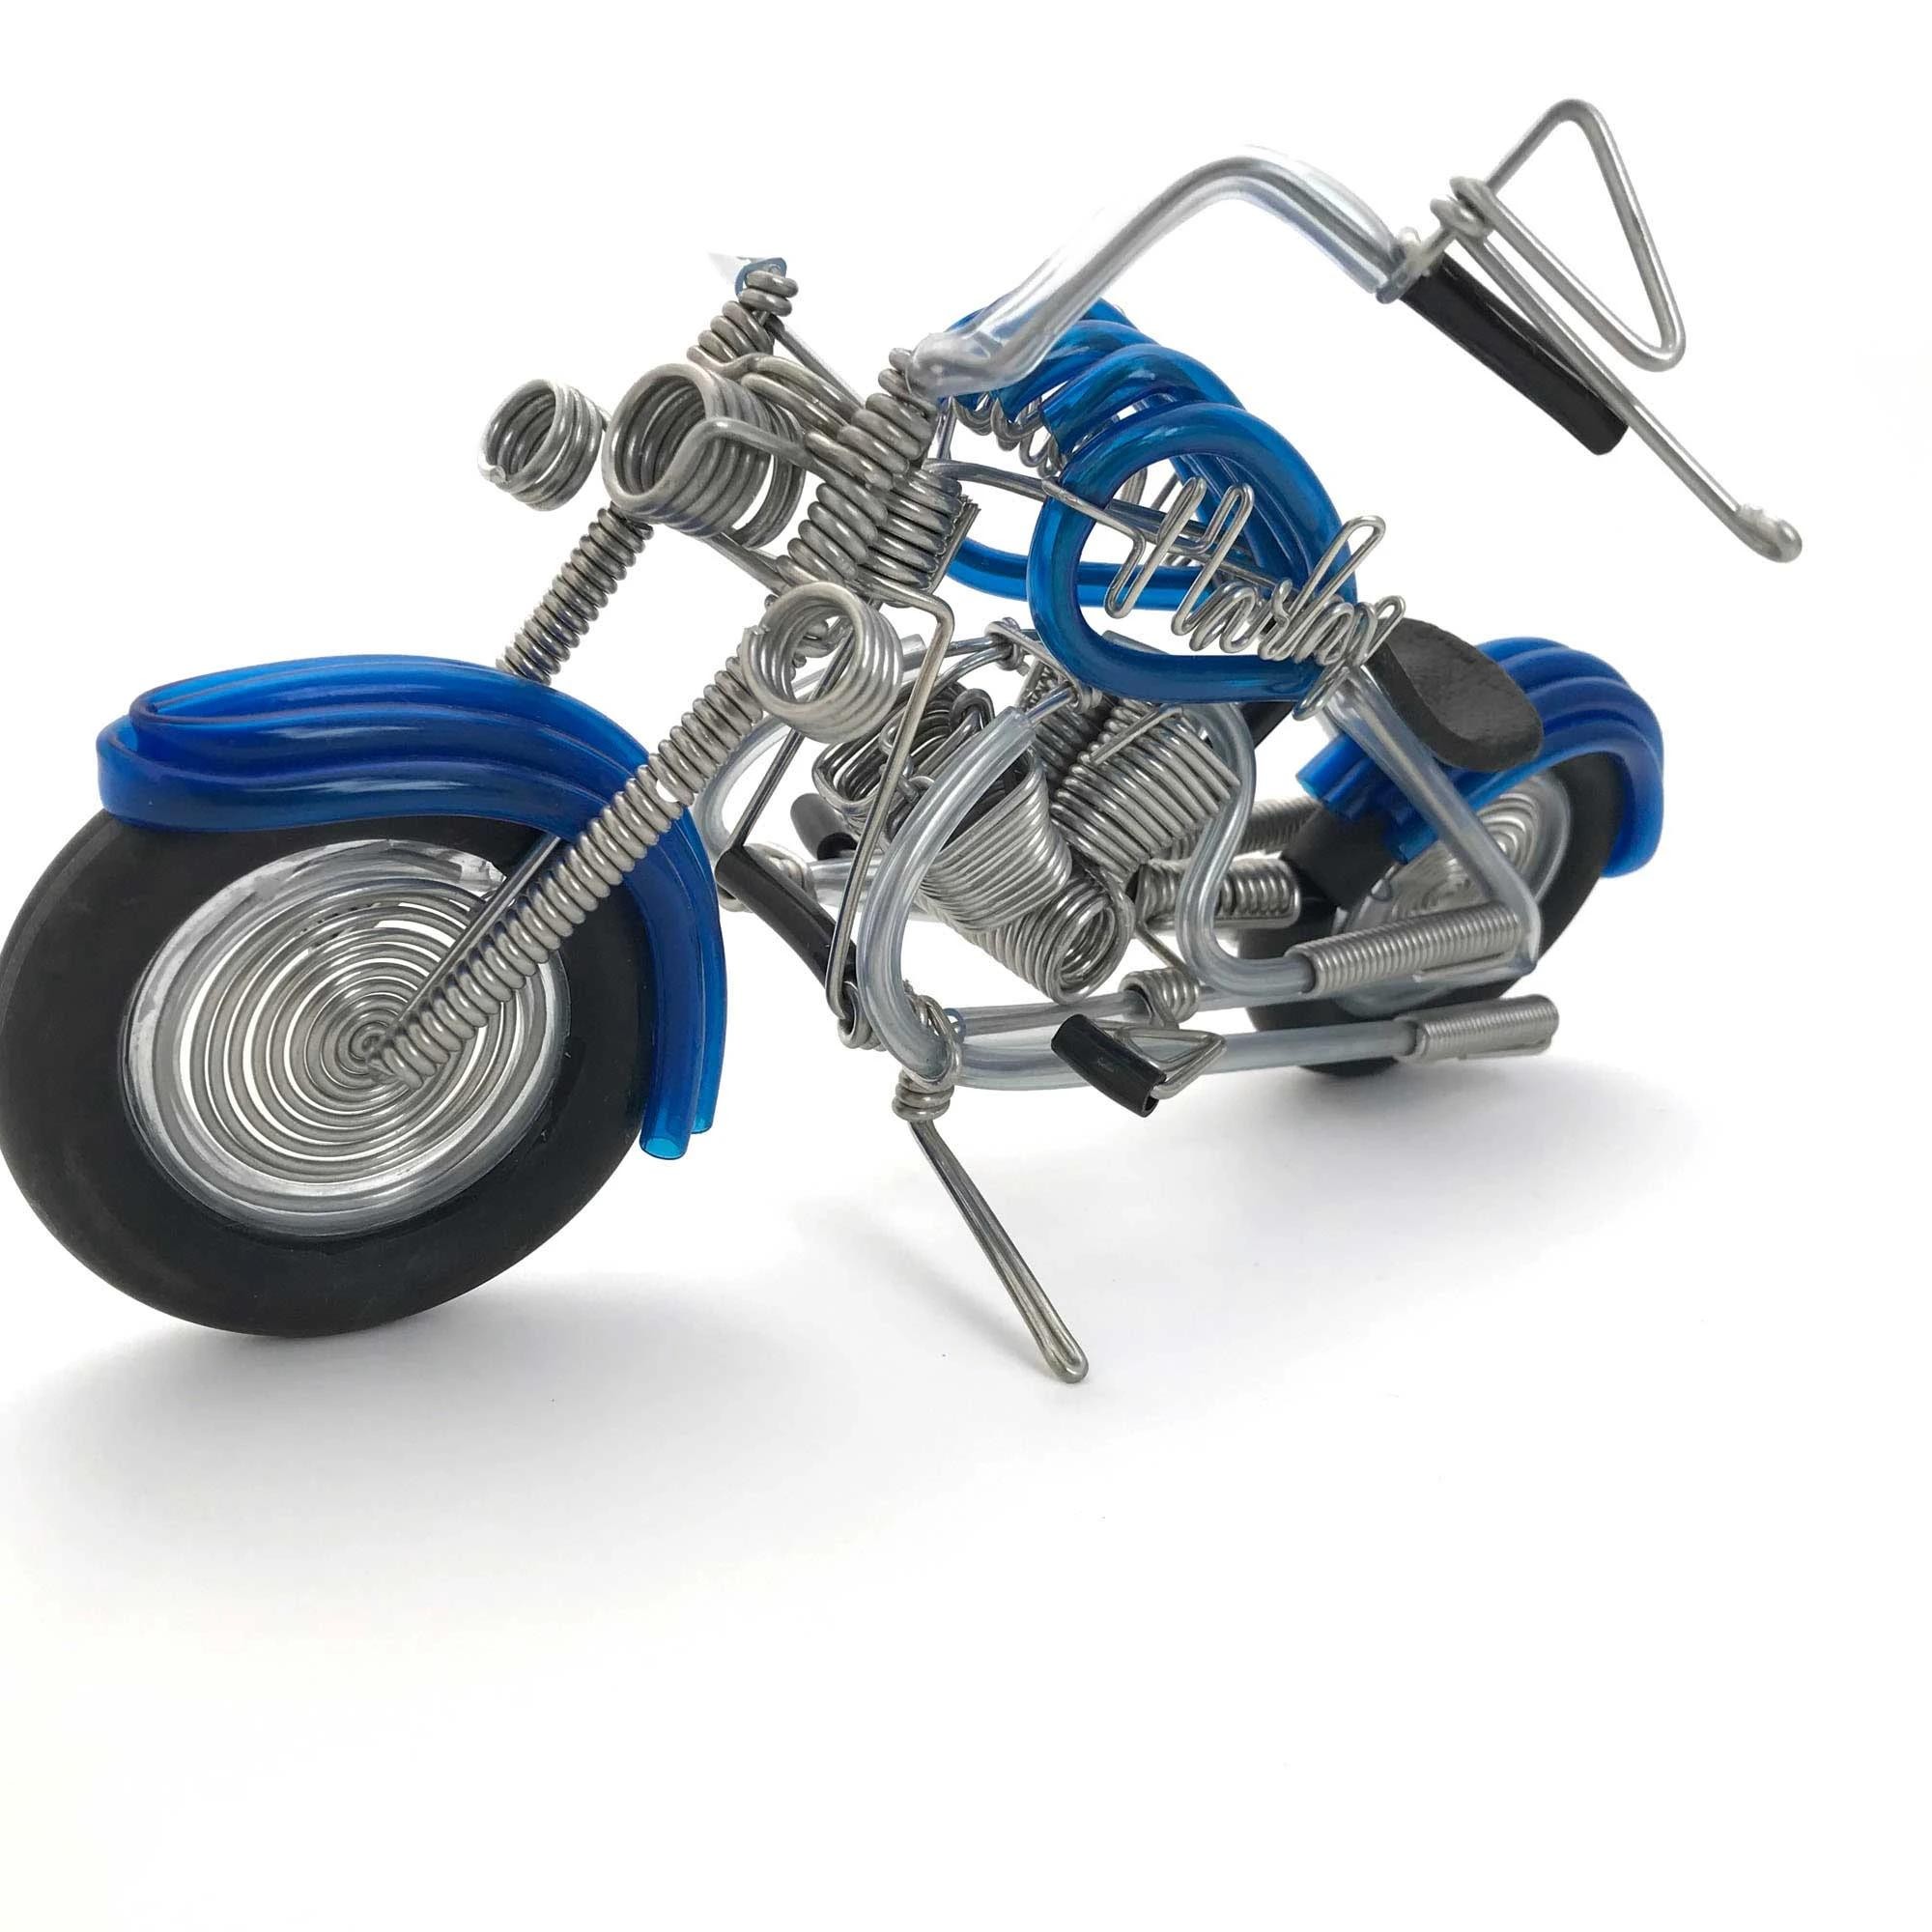 Miniature Harley Davidson Motorcycle Made of Aluminum Wire 